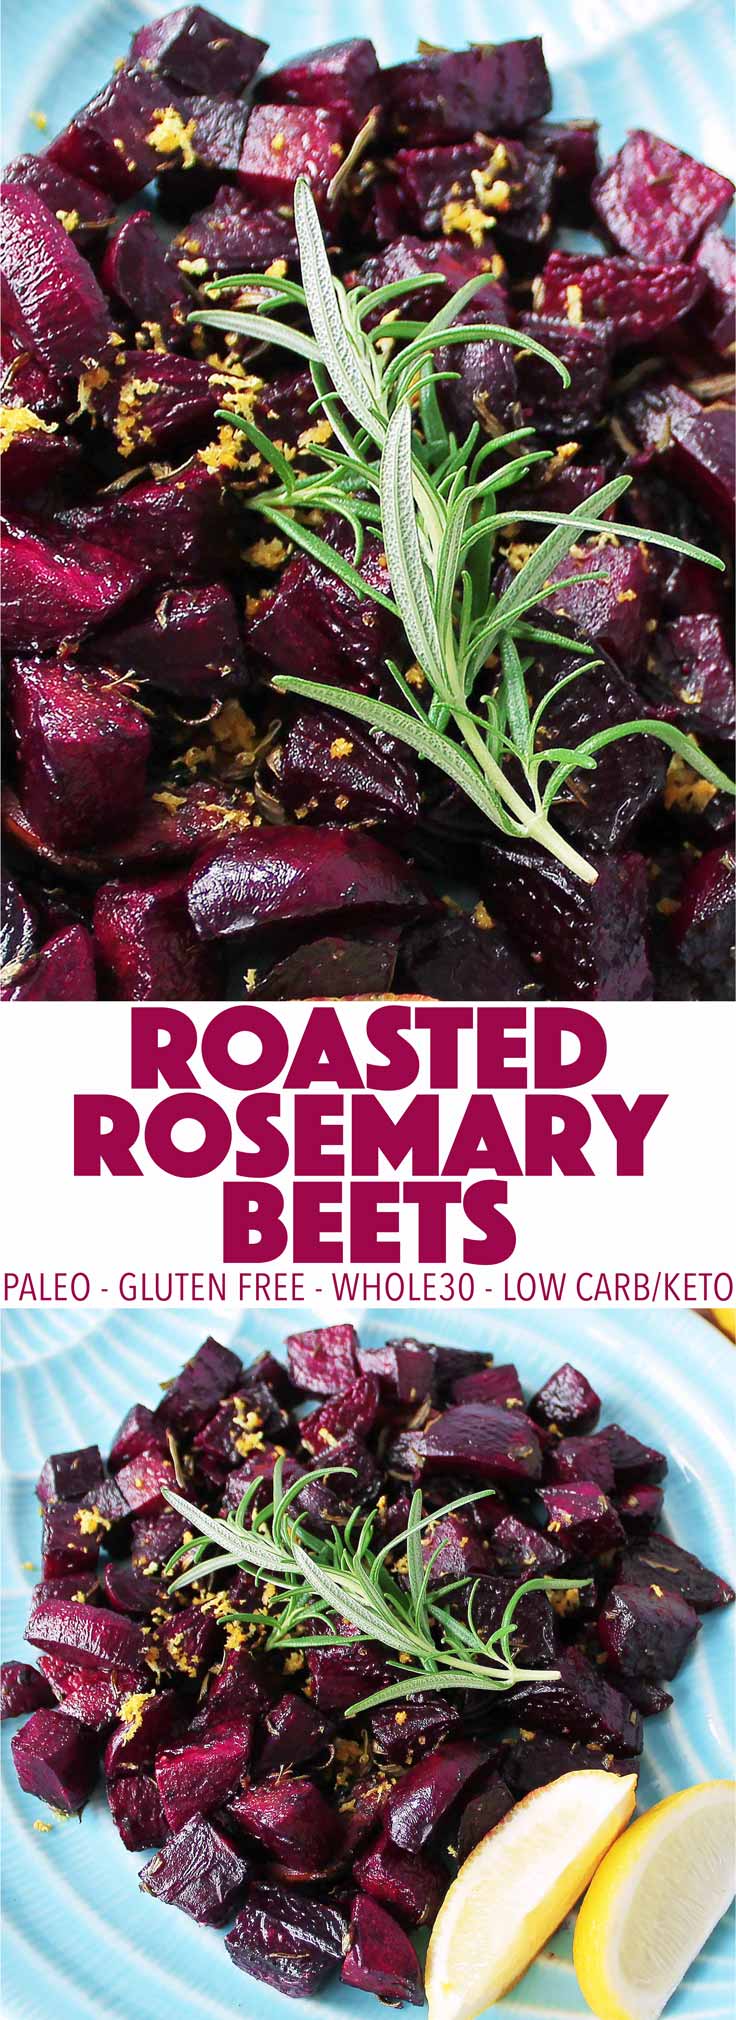 An easy, healthy side dish! These roasted rosemary beets are simple to make and full of flavor. This recipe is paleo, low carb, keto, and Whole30!